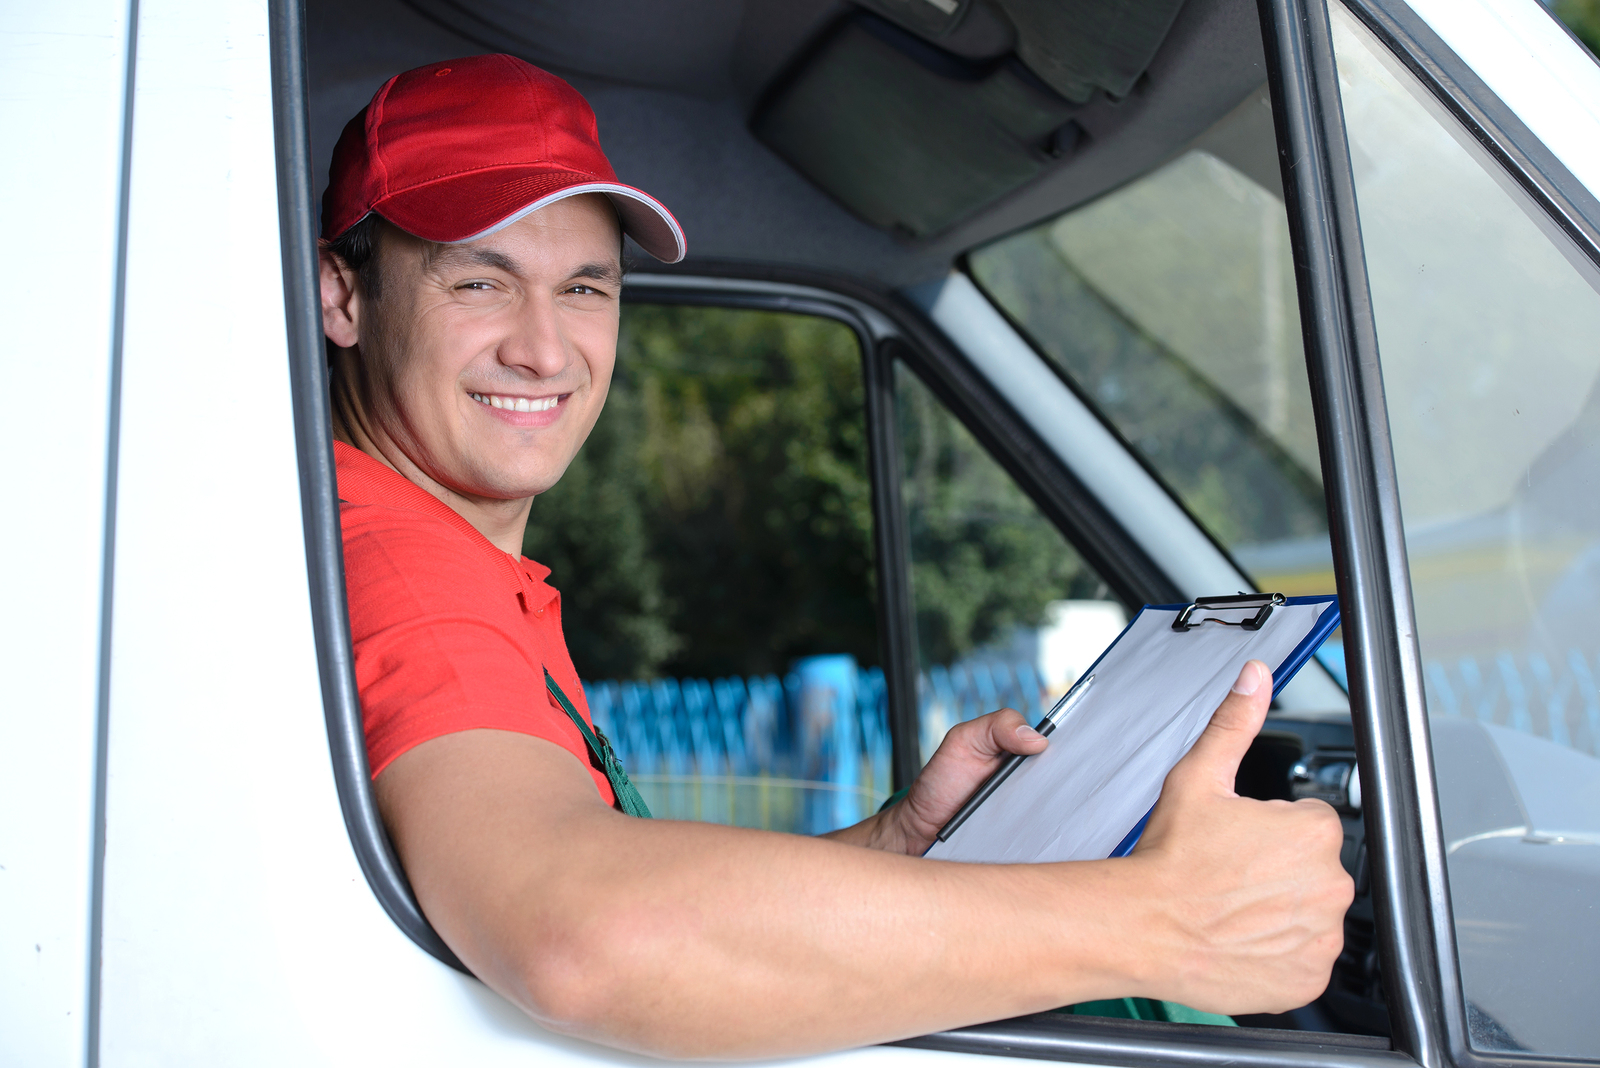 New Student Truck Driver Jobs in Wisconsin - Service One Transportation, Inc.